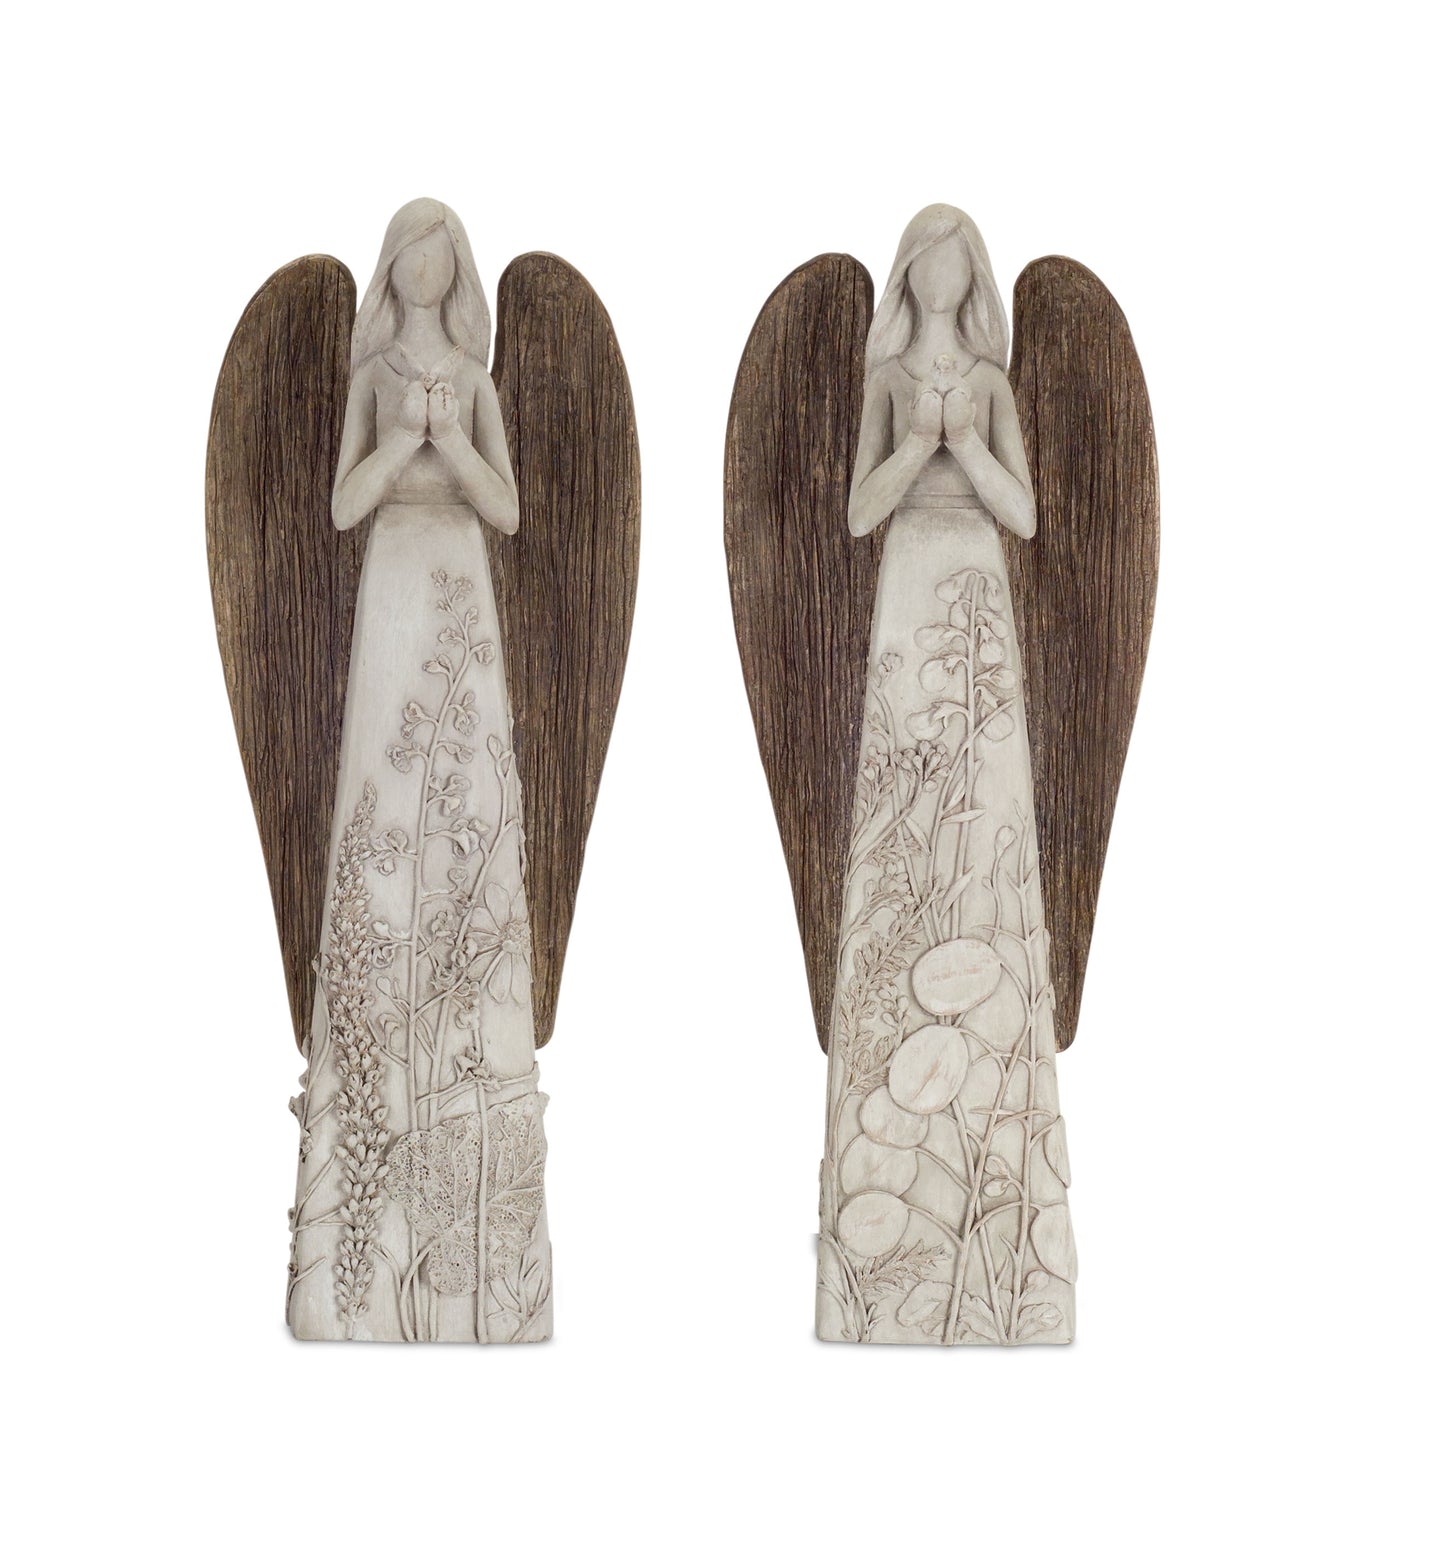 Floral Sculpted Angel with Wood Style Wings (Set of 2)